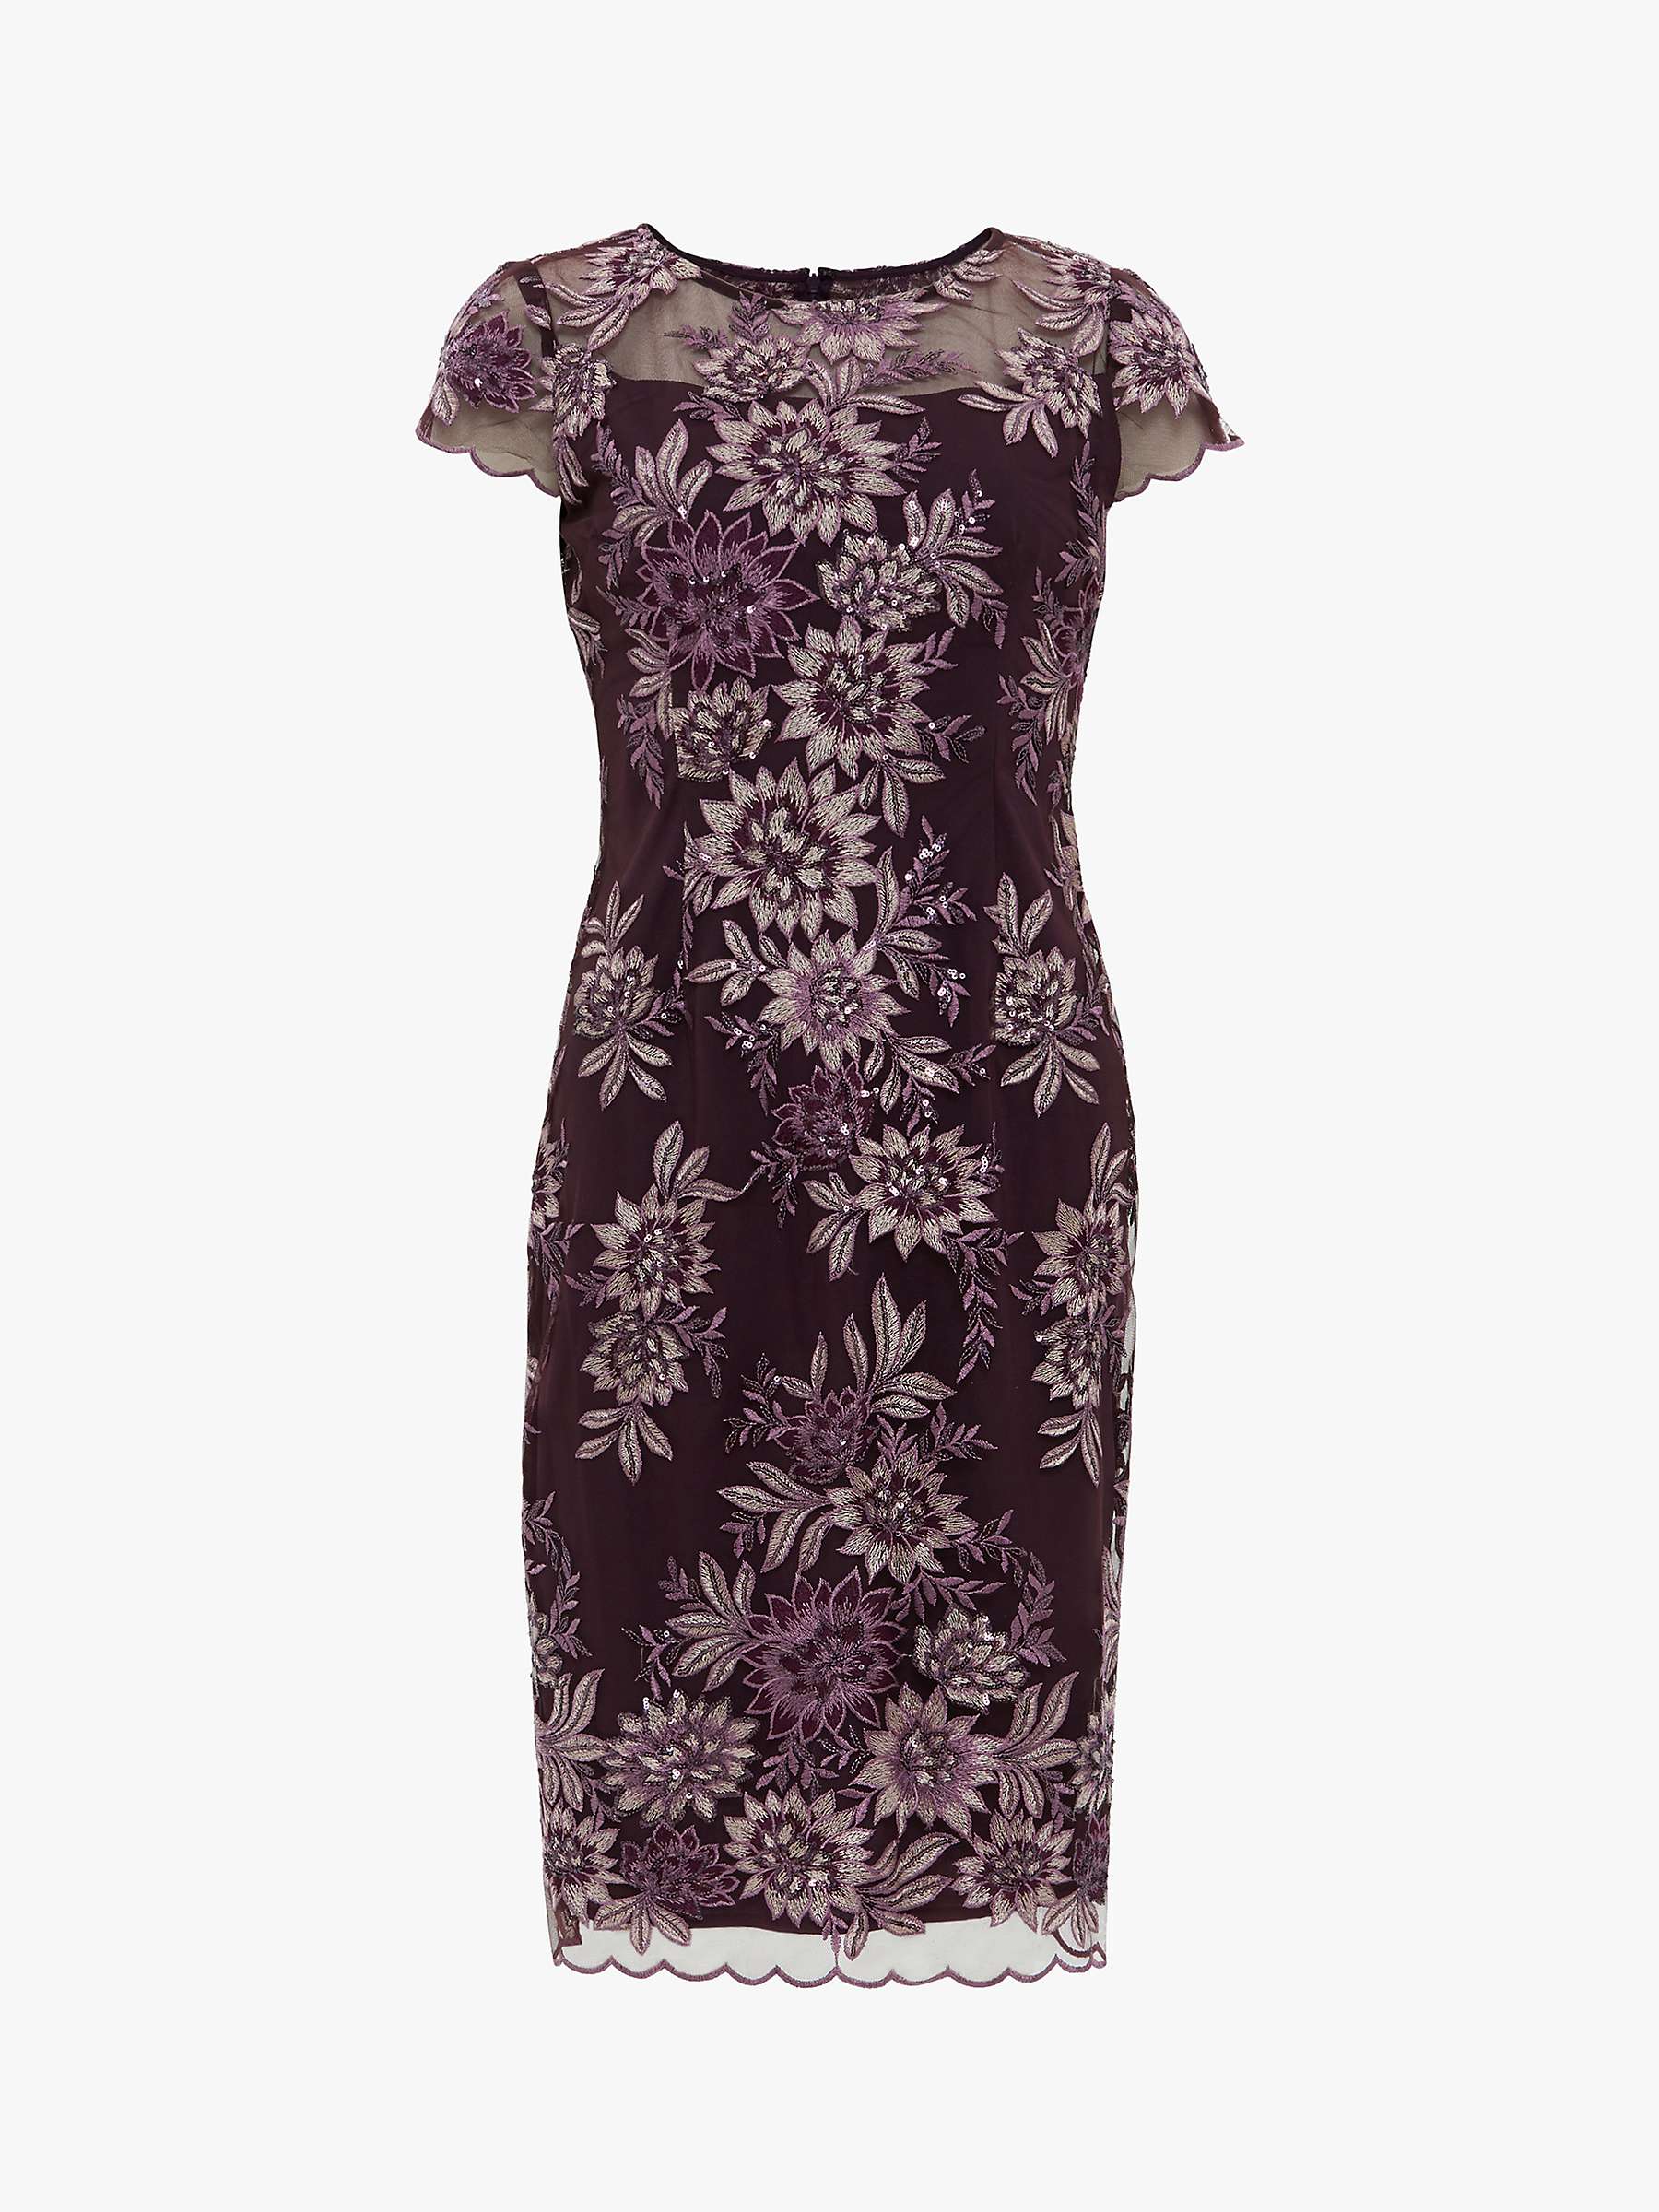 Buy Gina Bacconi Arianna Floral Embroidered Dress, Plum Online at johnlewis.com